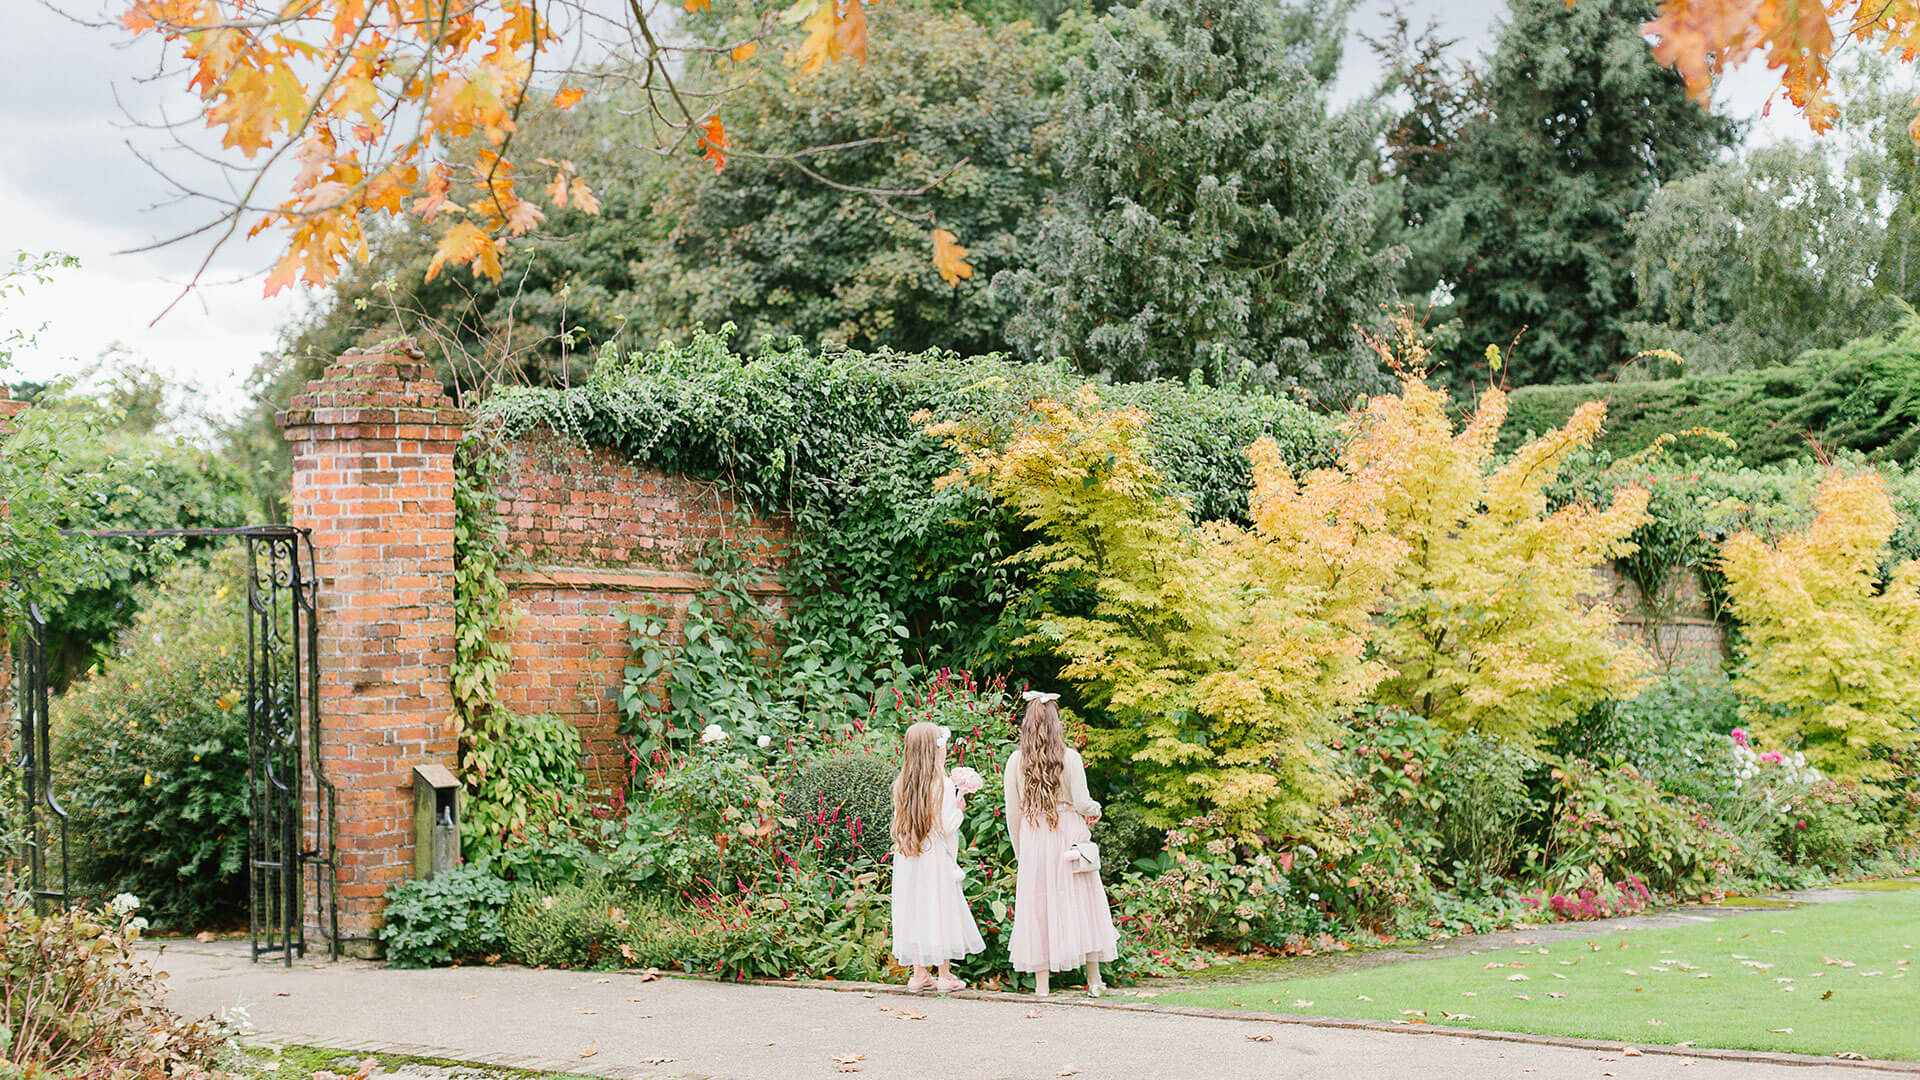 Flowers girls walk down the outdoor wedding aisle during a beautiful autumn wedding day